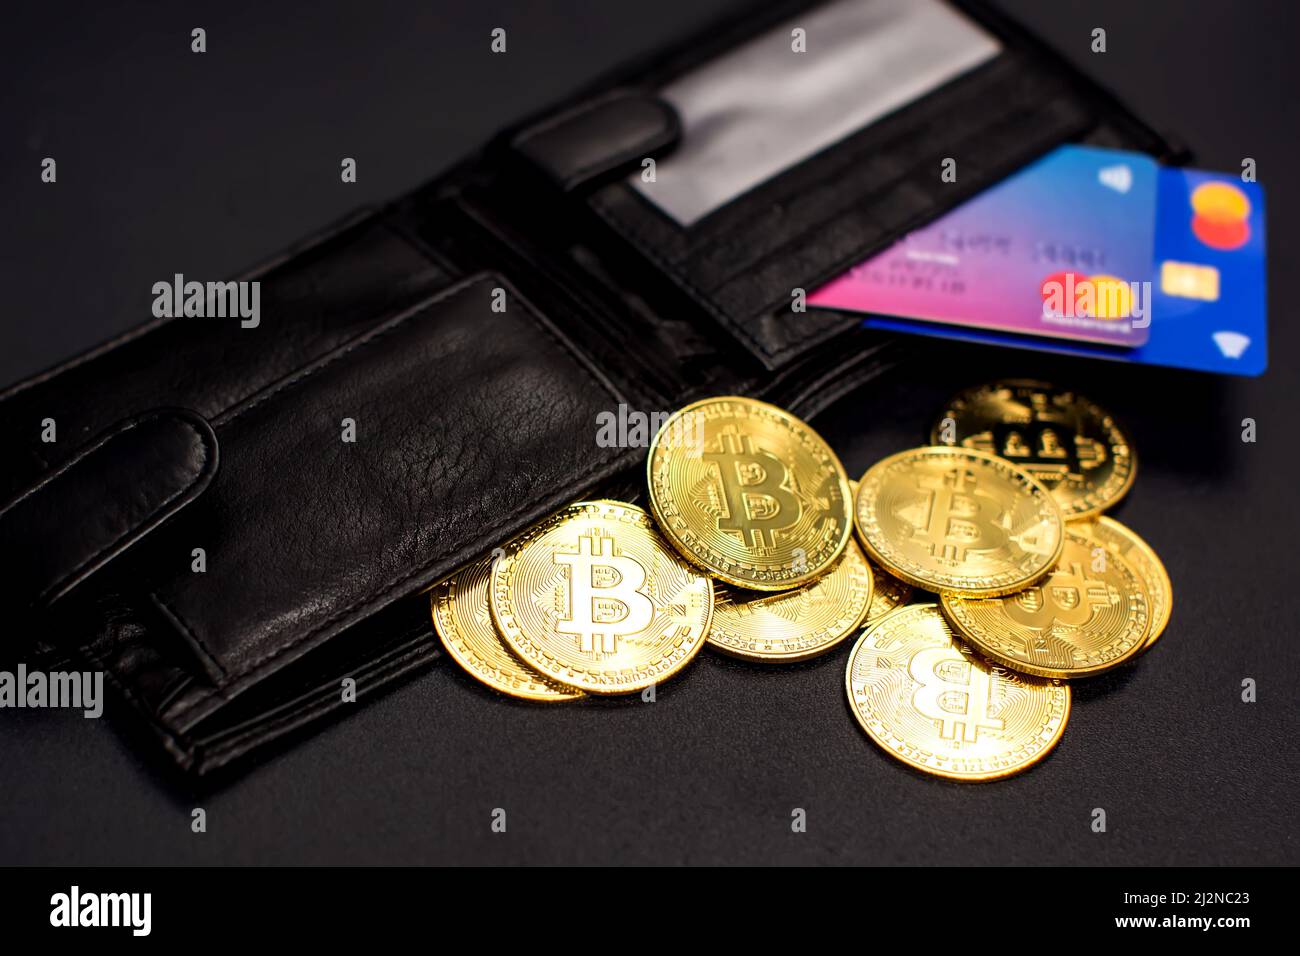 Bitcoin coins and credit cards in a wallet on the blackboard background Stock Photo